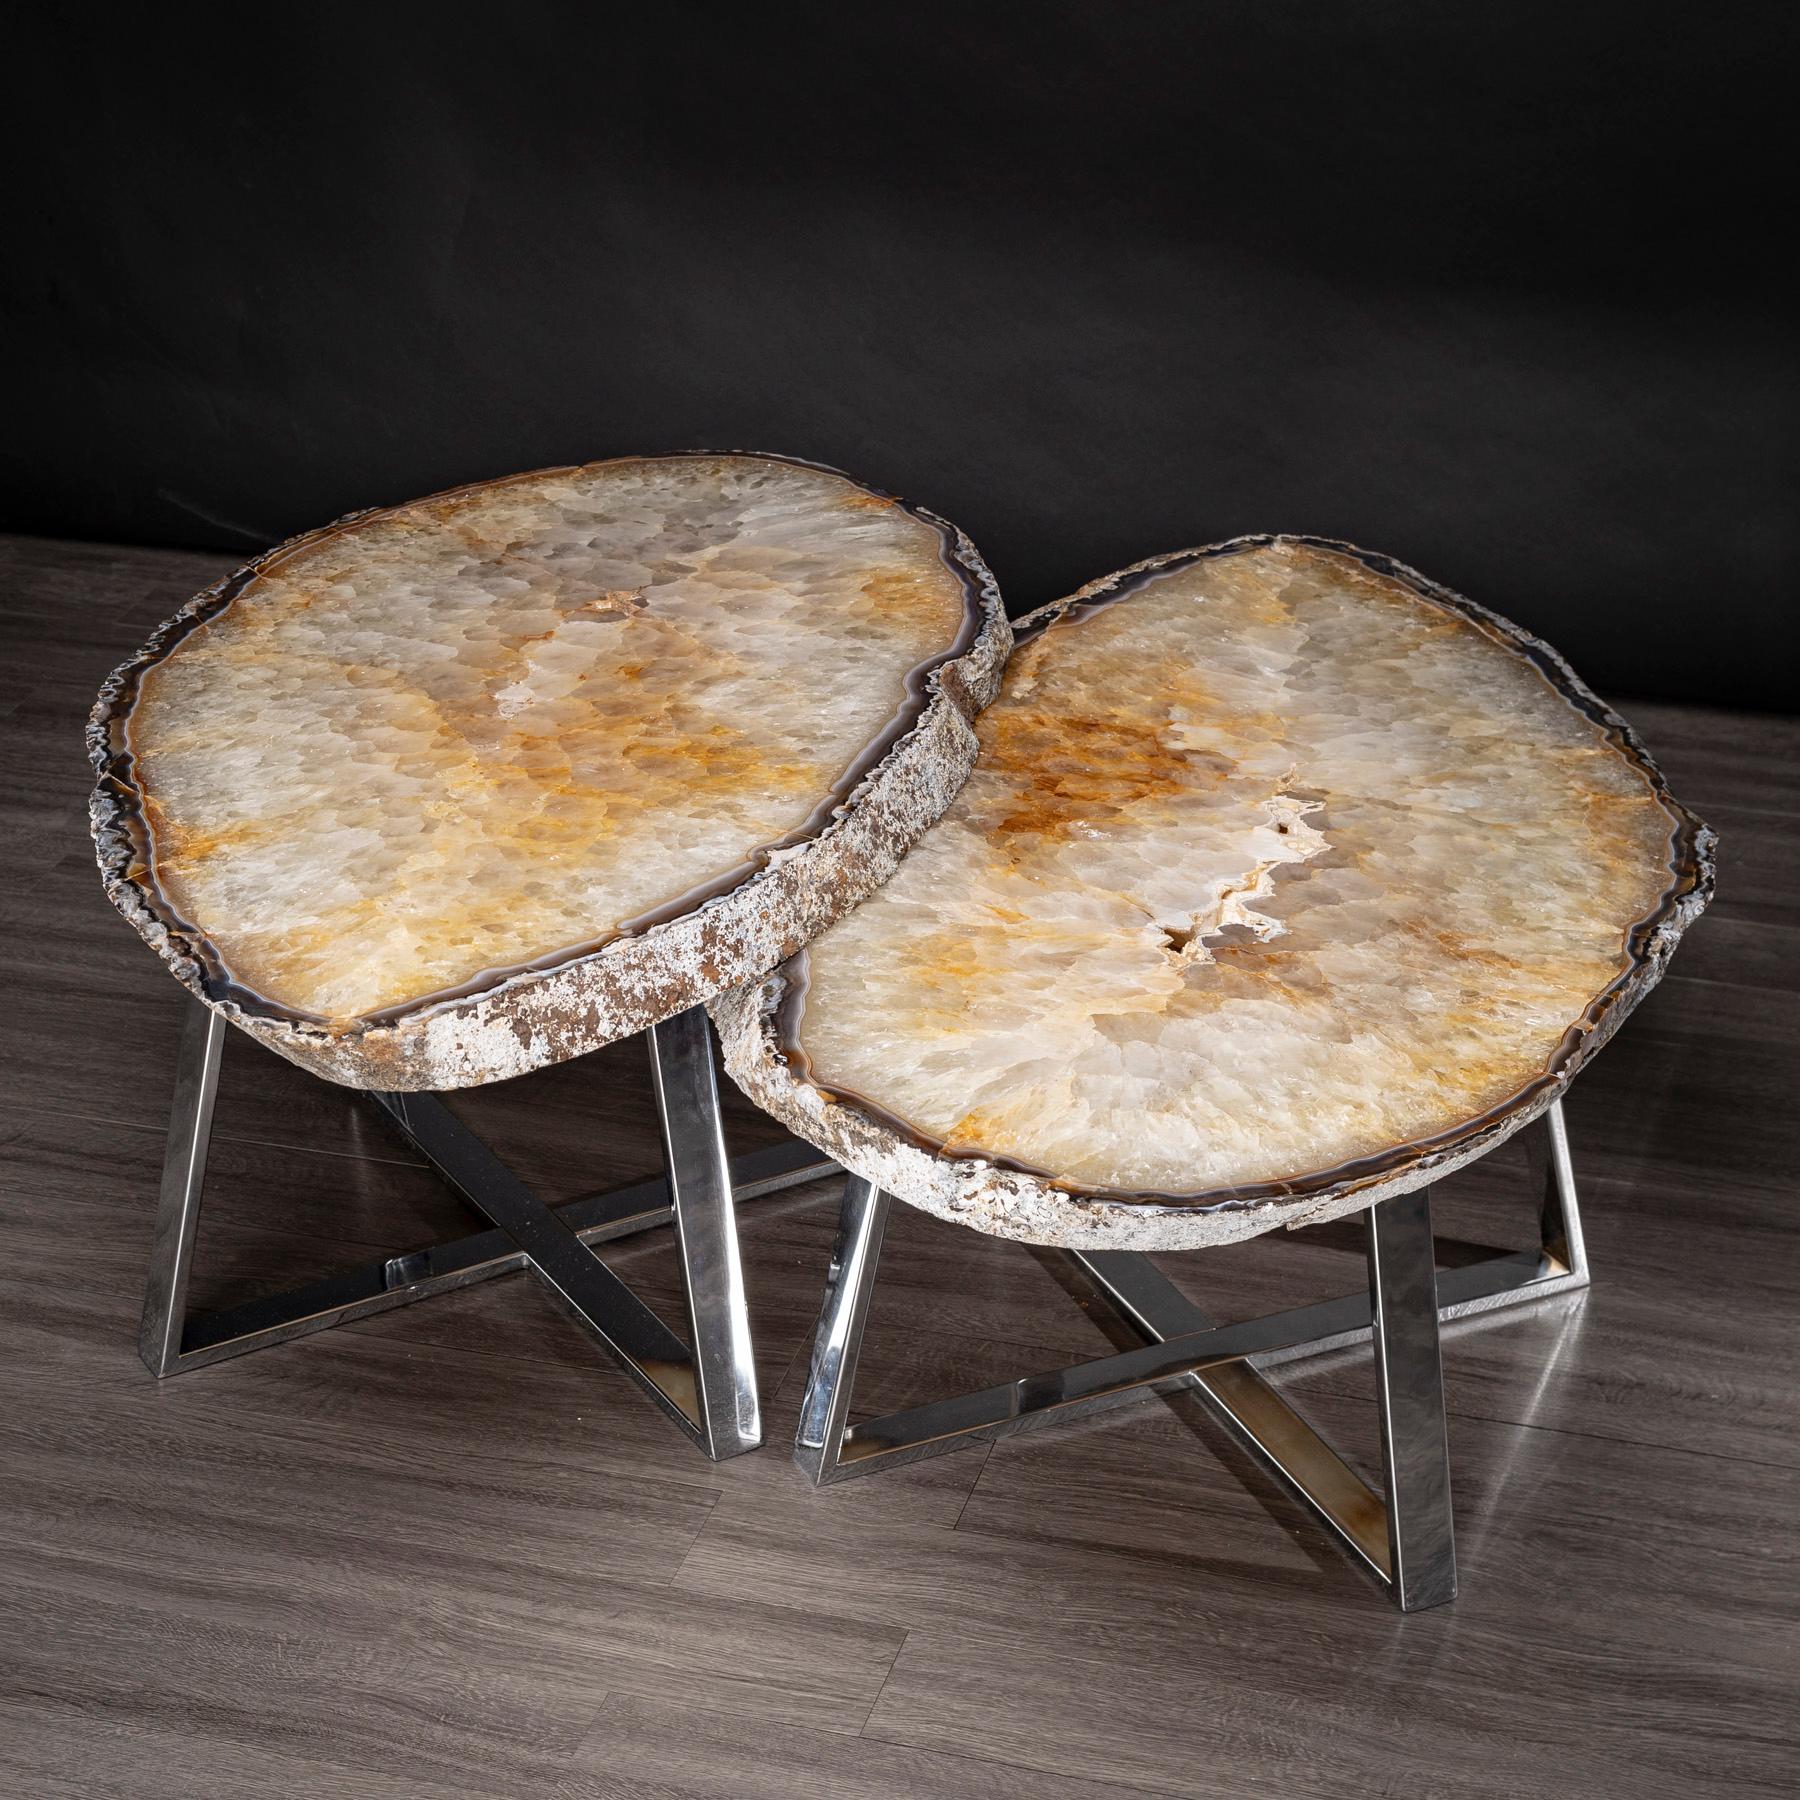 Organic Modern Side or Center Table, Pair of Brazilian Agates with Nickel Finish Metal Base